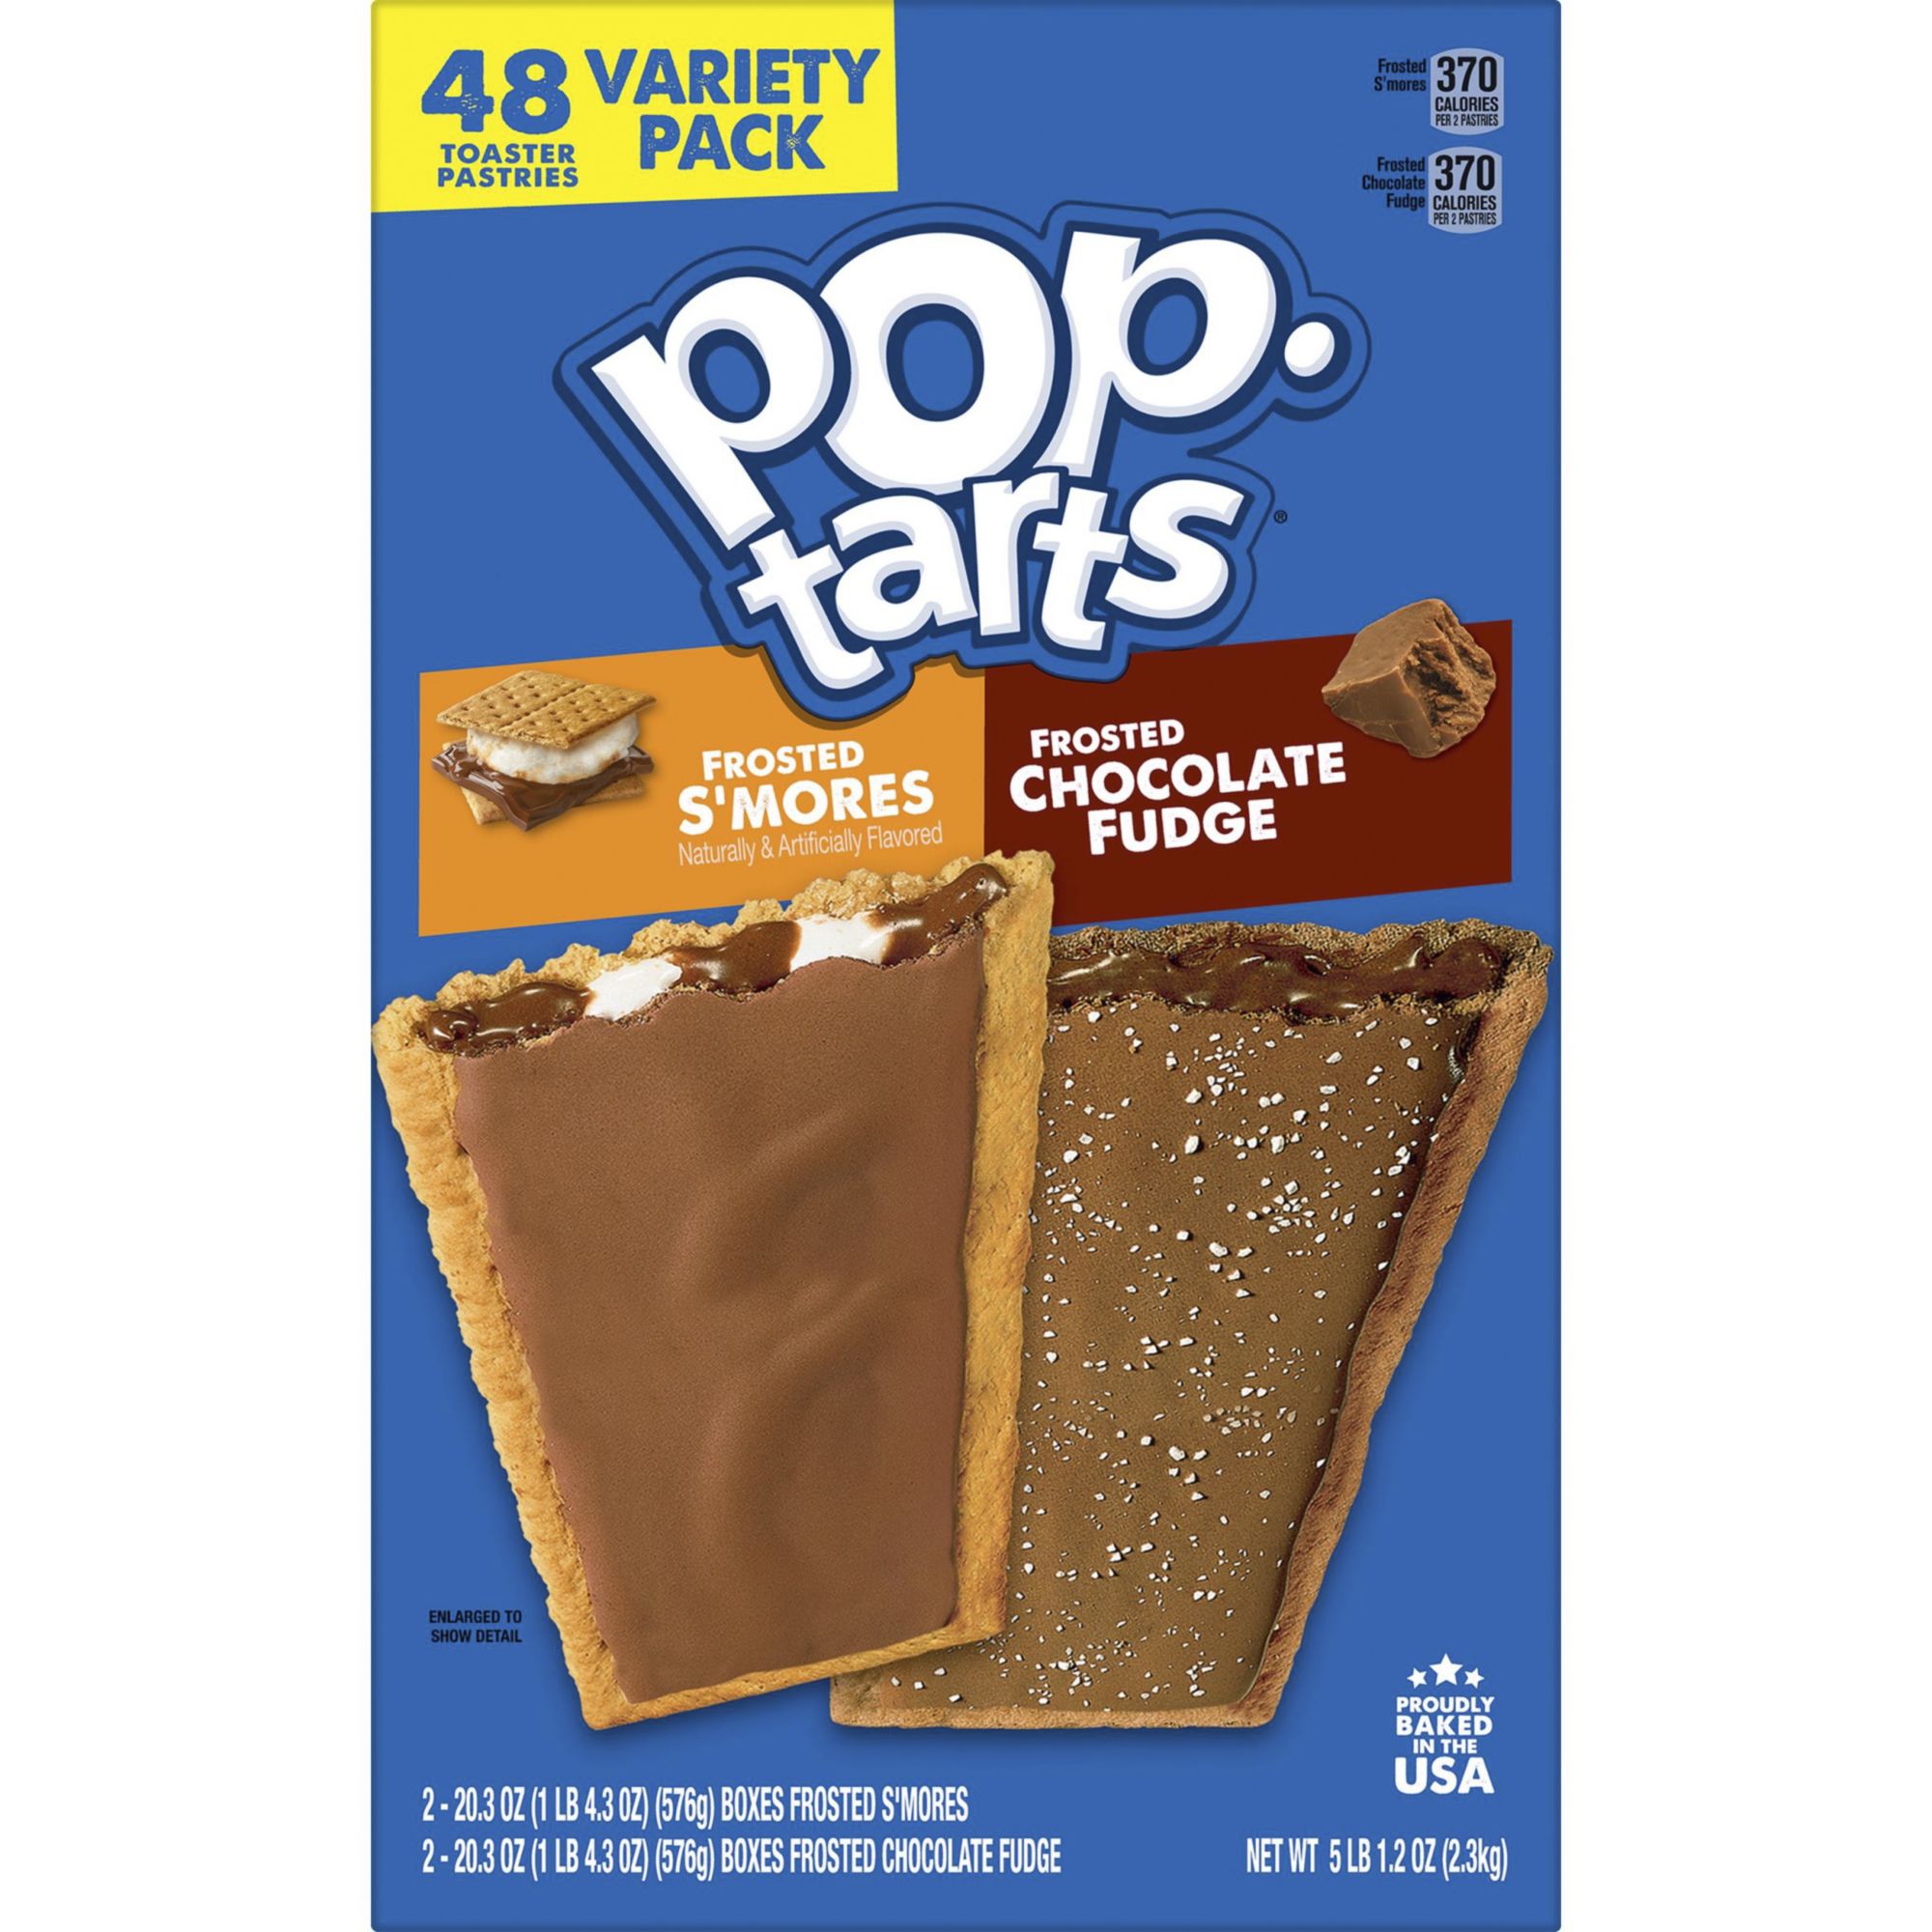  9 Pack! The Ultimate Pop Tarts Variety Pack 9 Different Flavors  - Bundle of 9 Boxes, 1 of Each Flavor. Gift Box, Value Pack, Breakfast Food